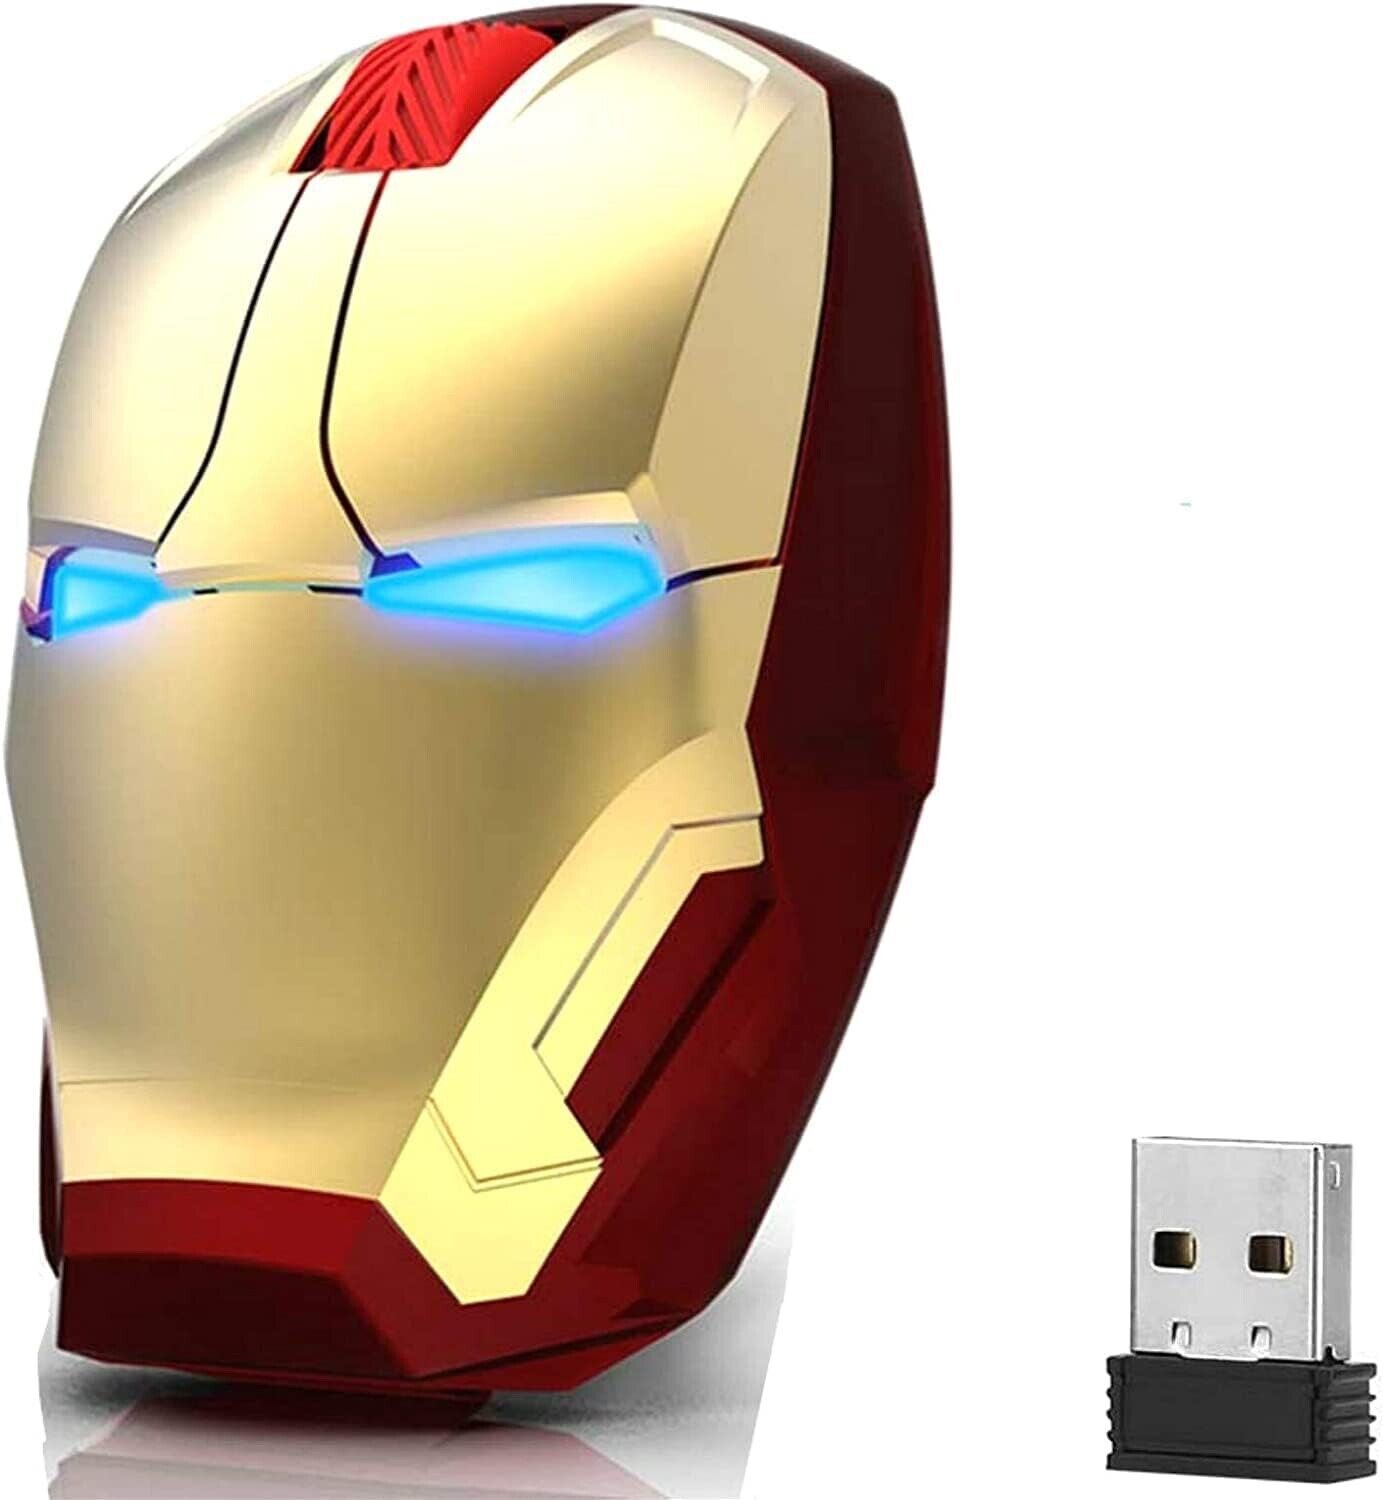 Iron Man Mouse, 2.4G Noiseless Wireless Mouse with USB